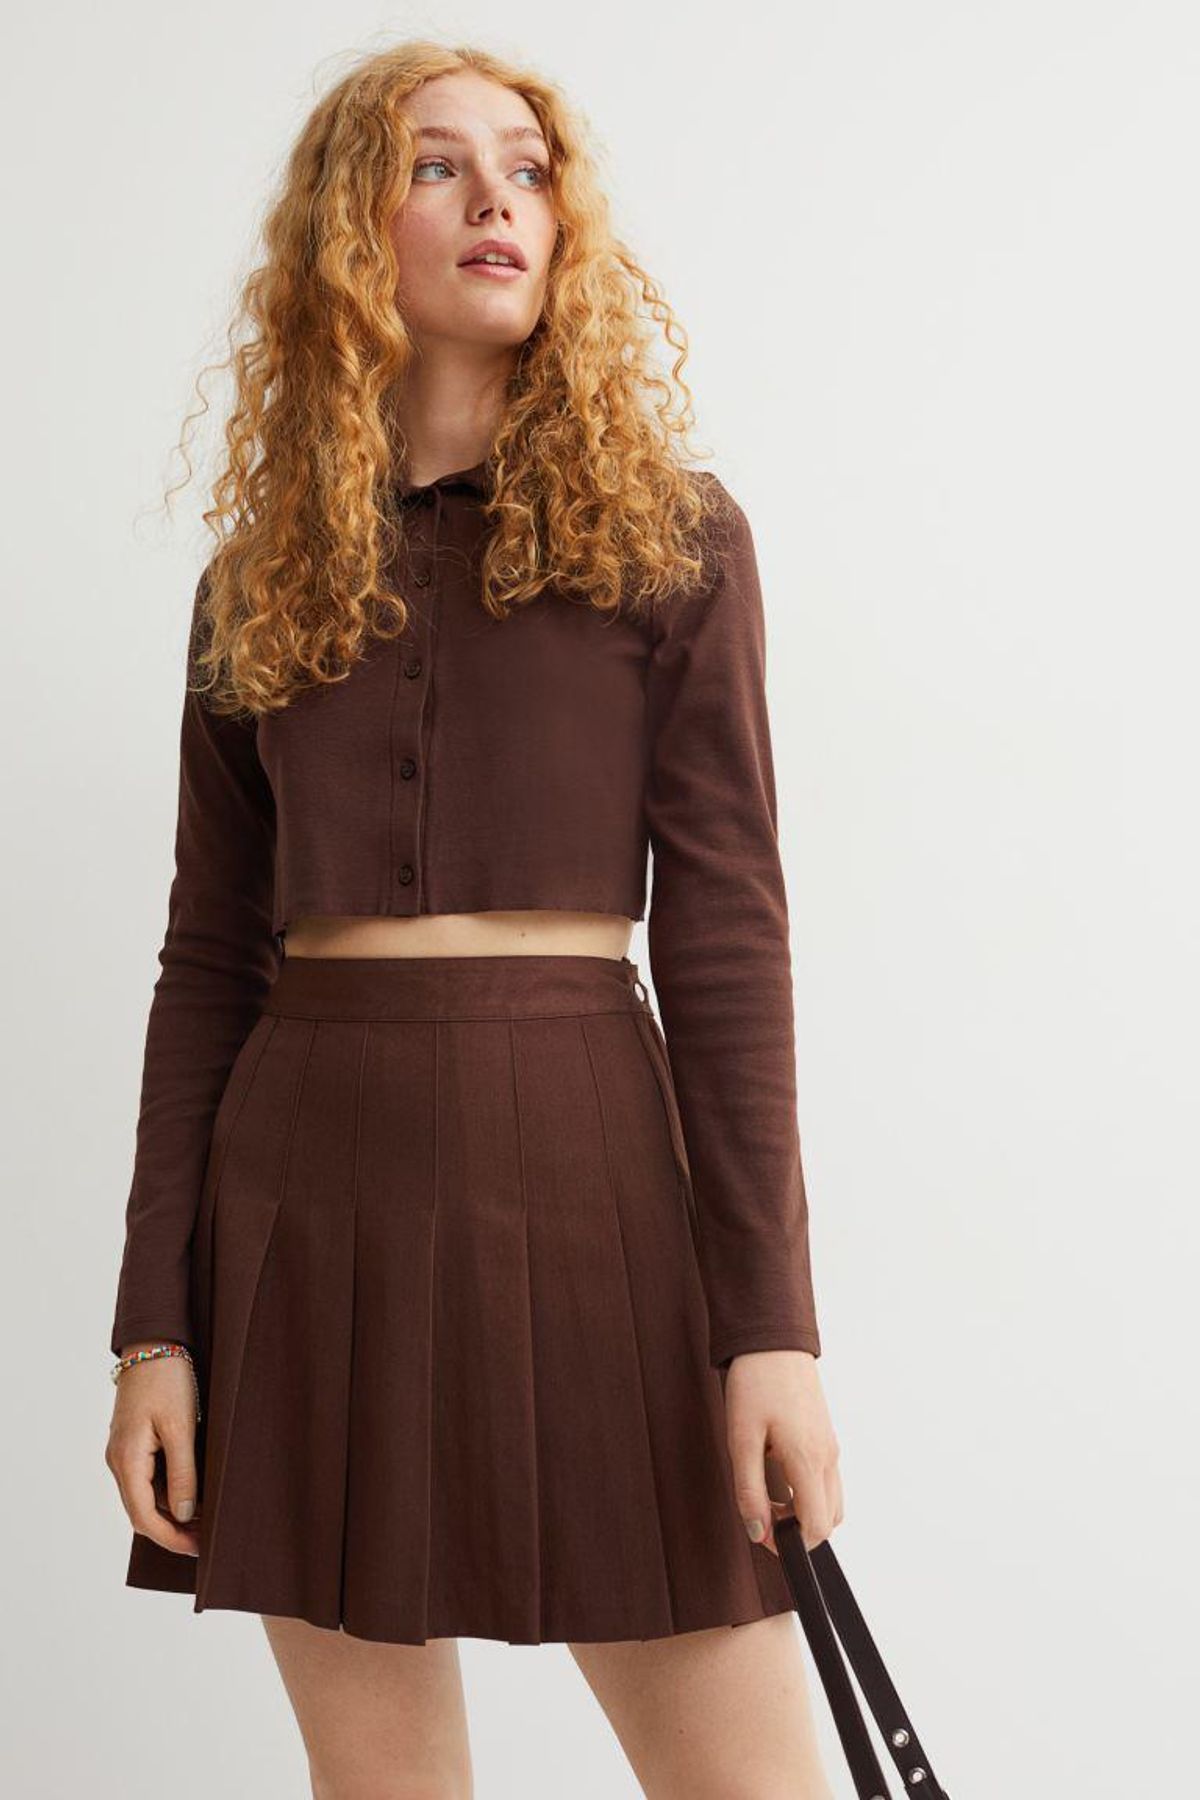 h and m short pleated skirt